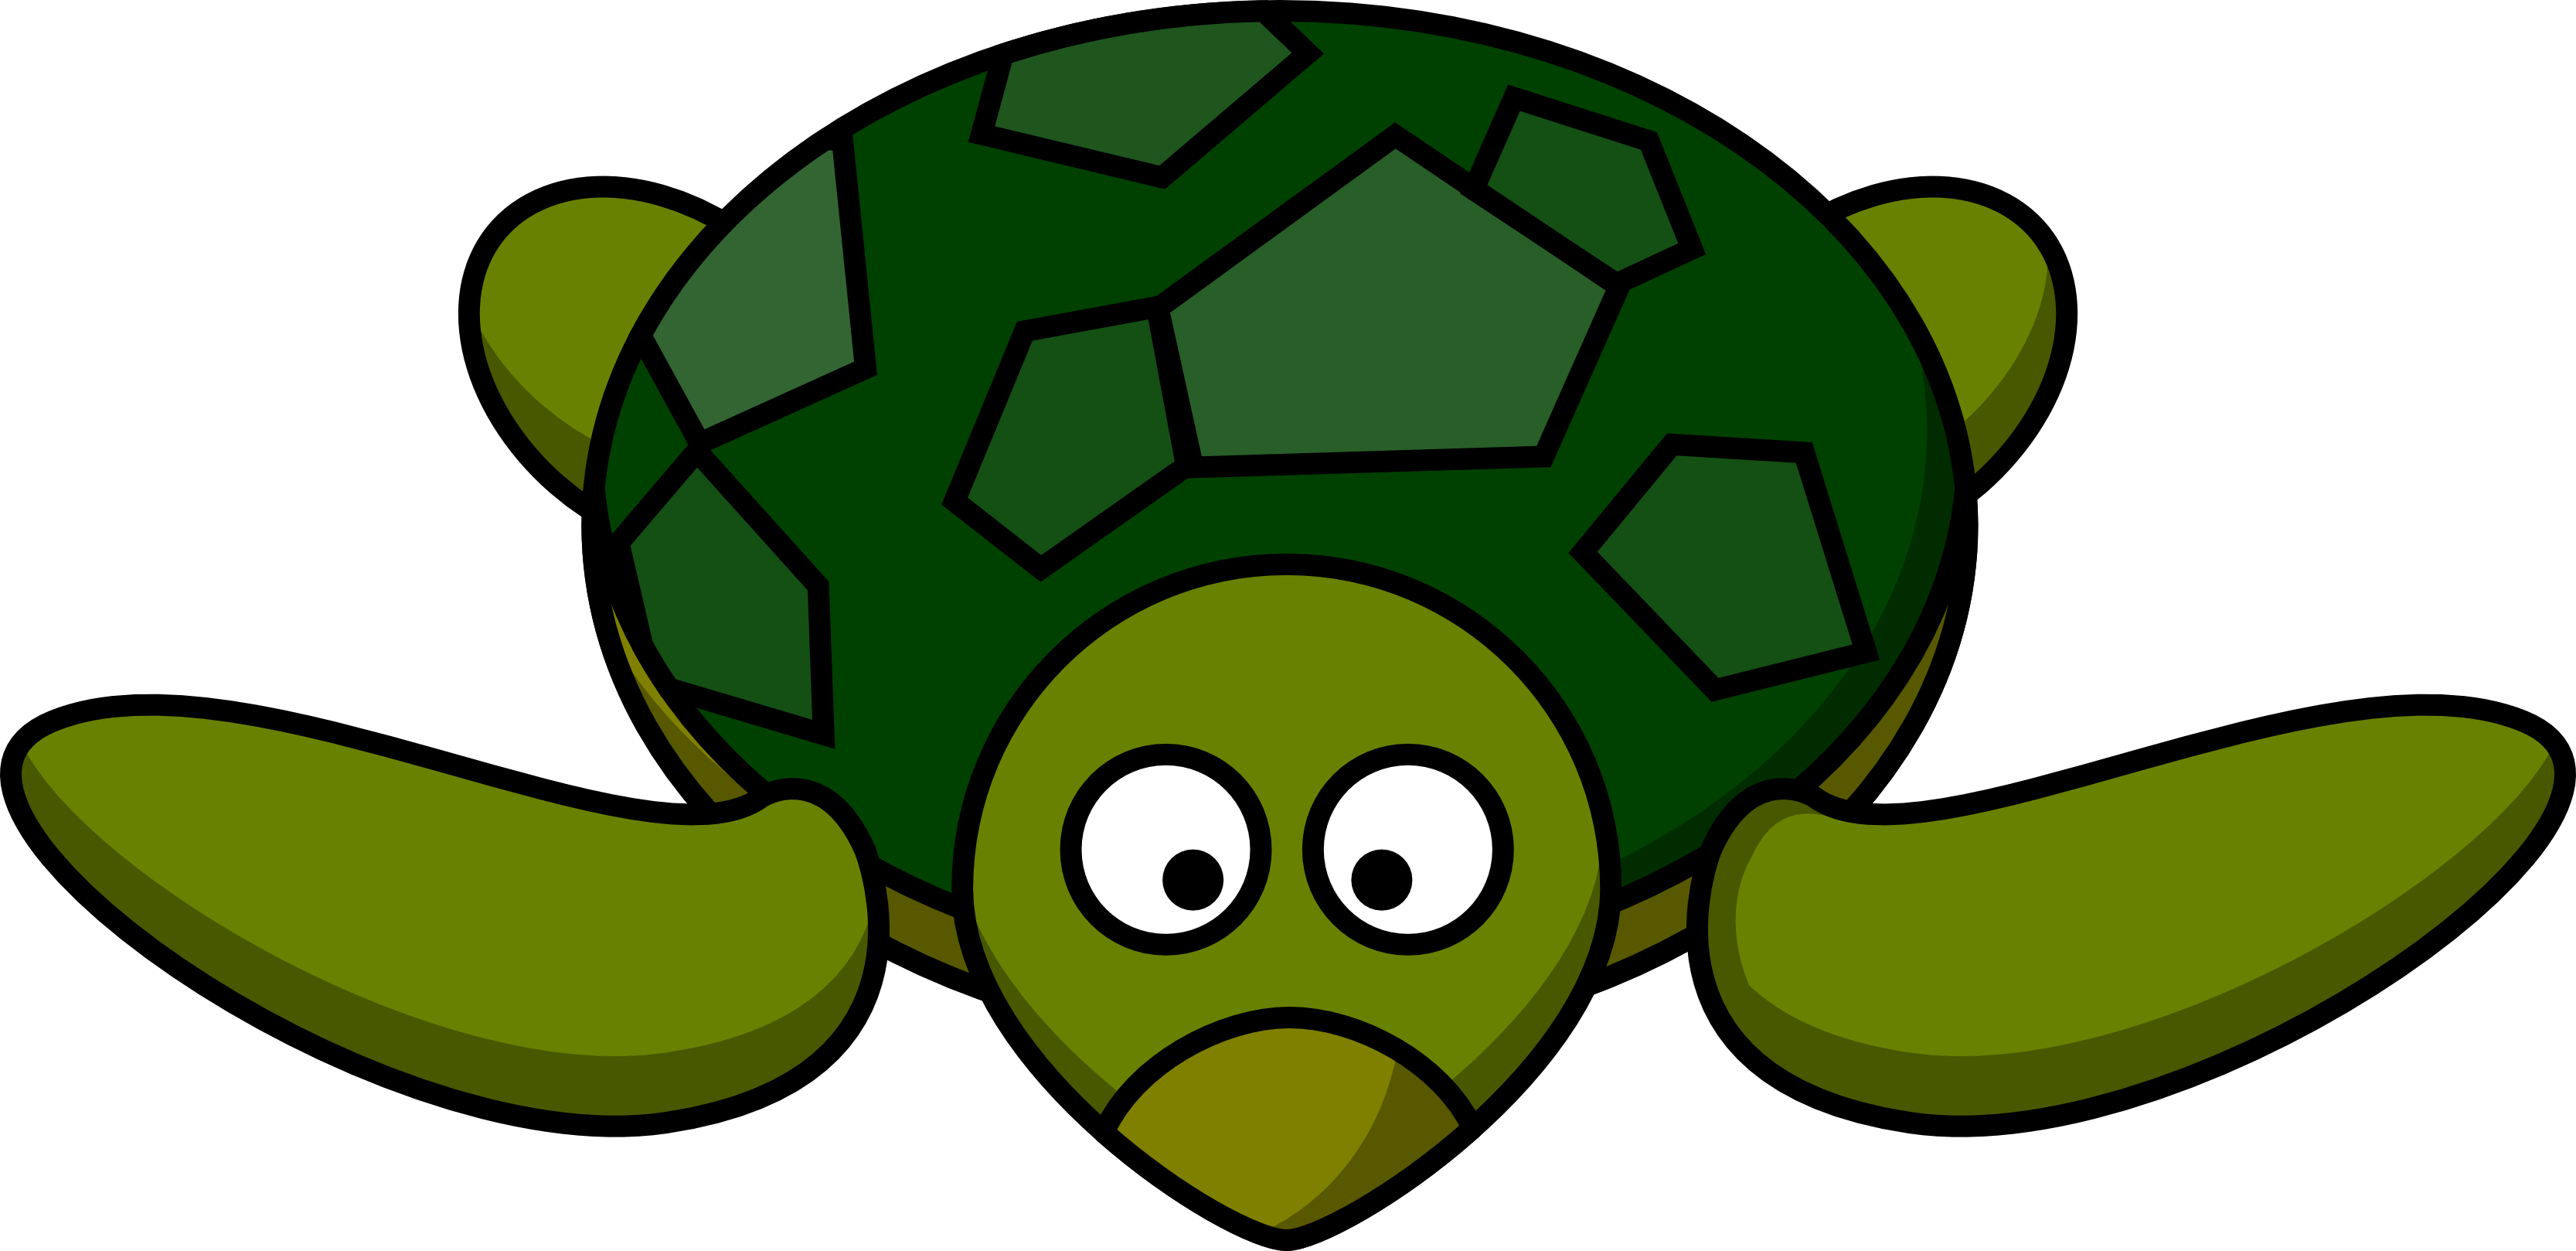 Free Christmas Turtle Cliparts, Download Free Clip Art, Free.